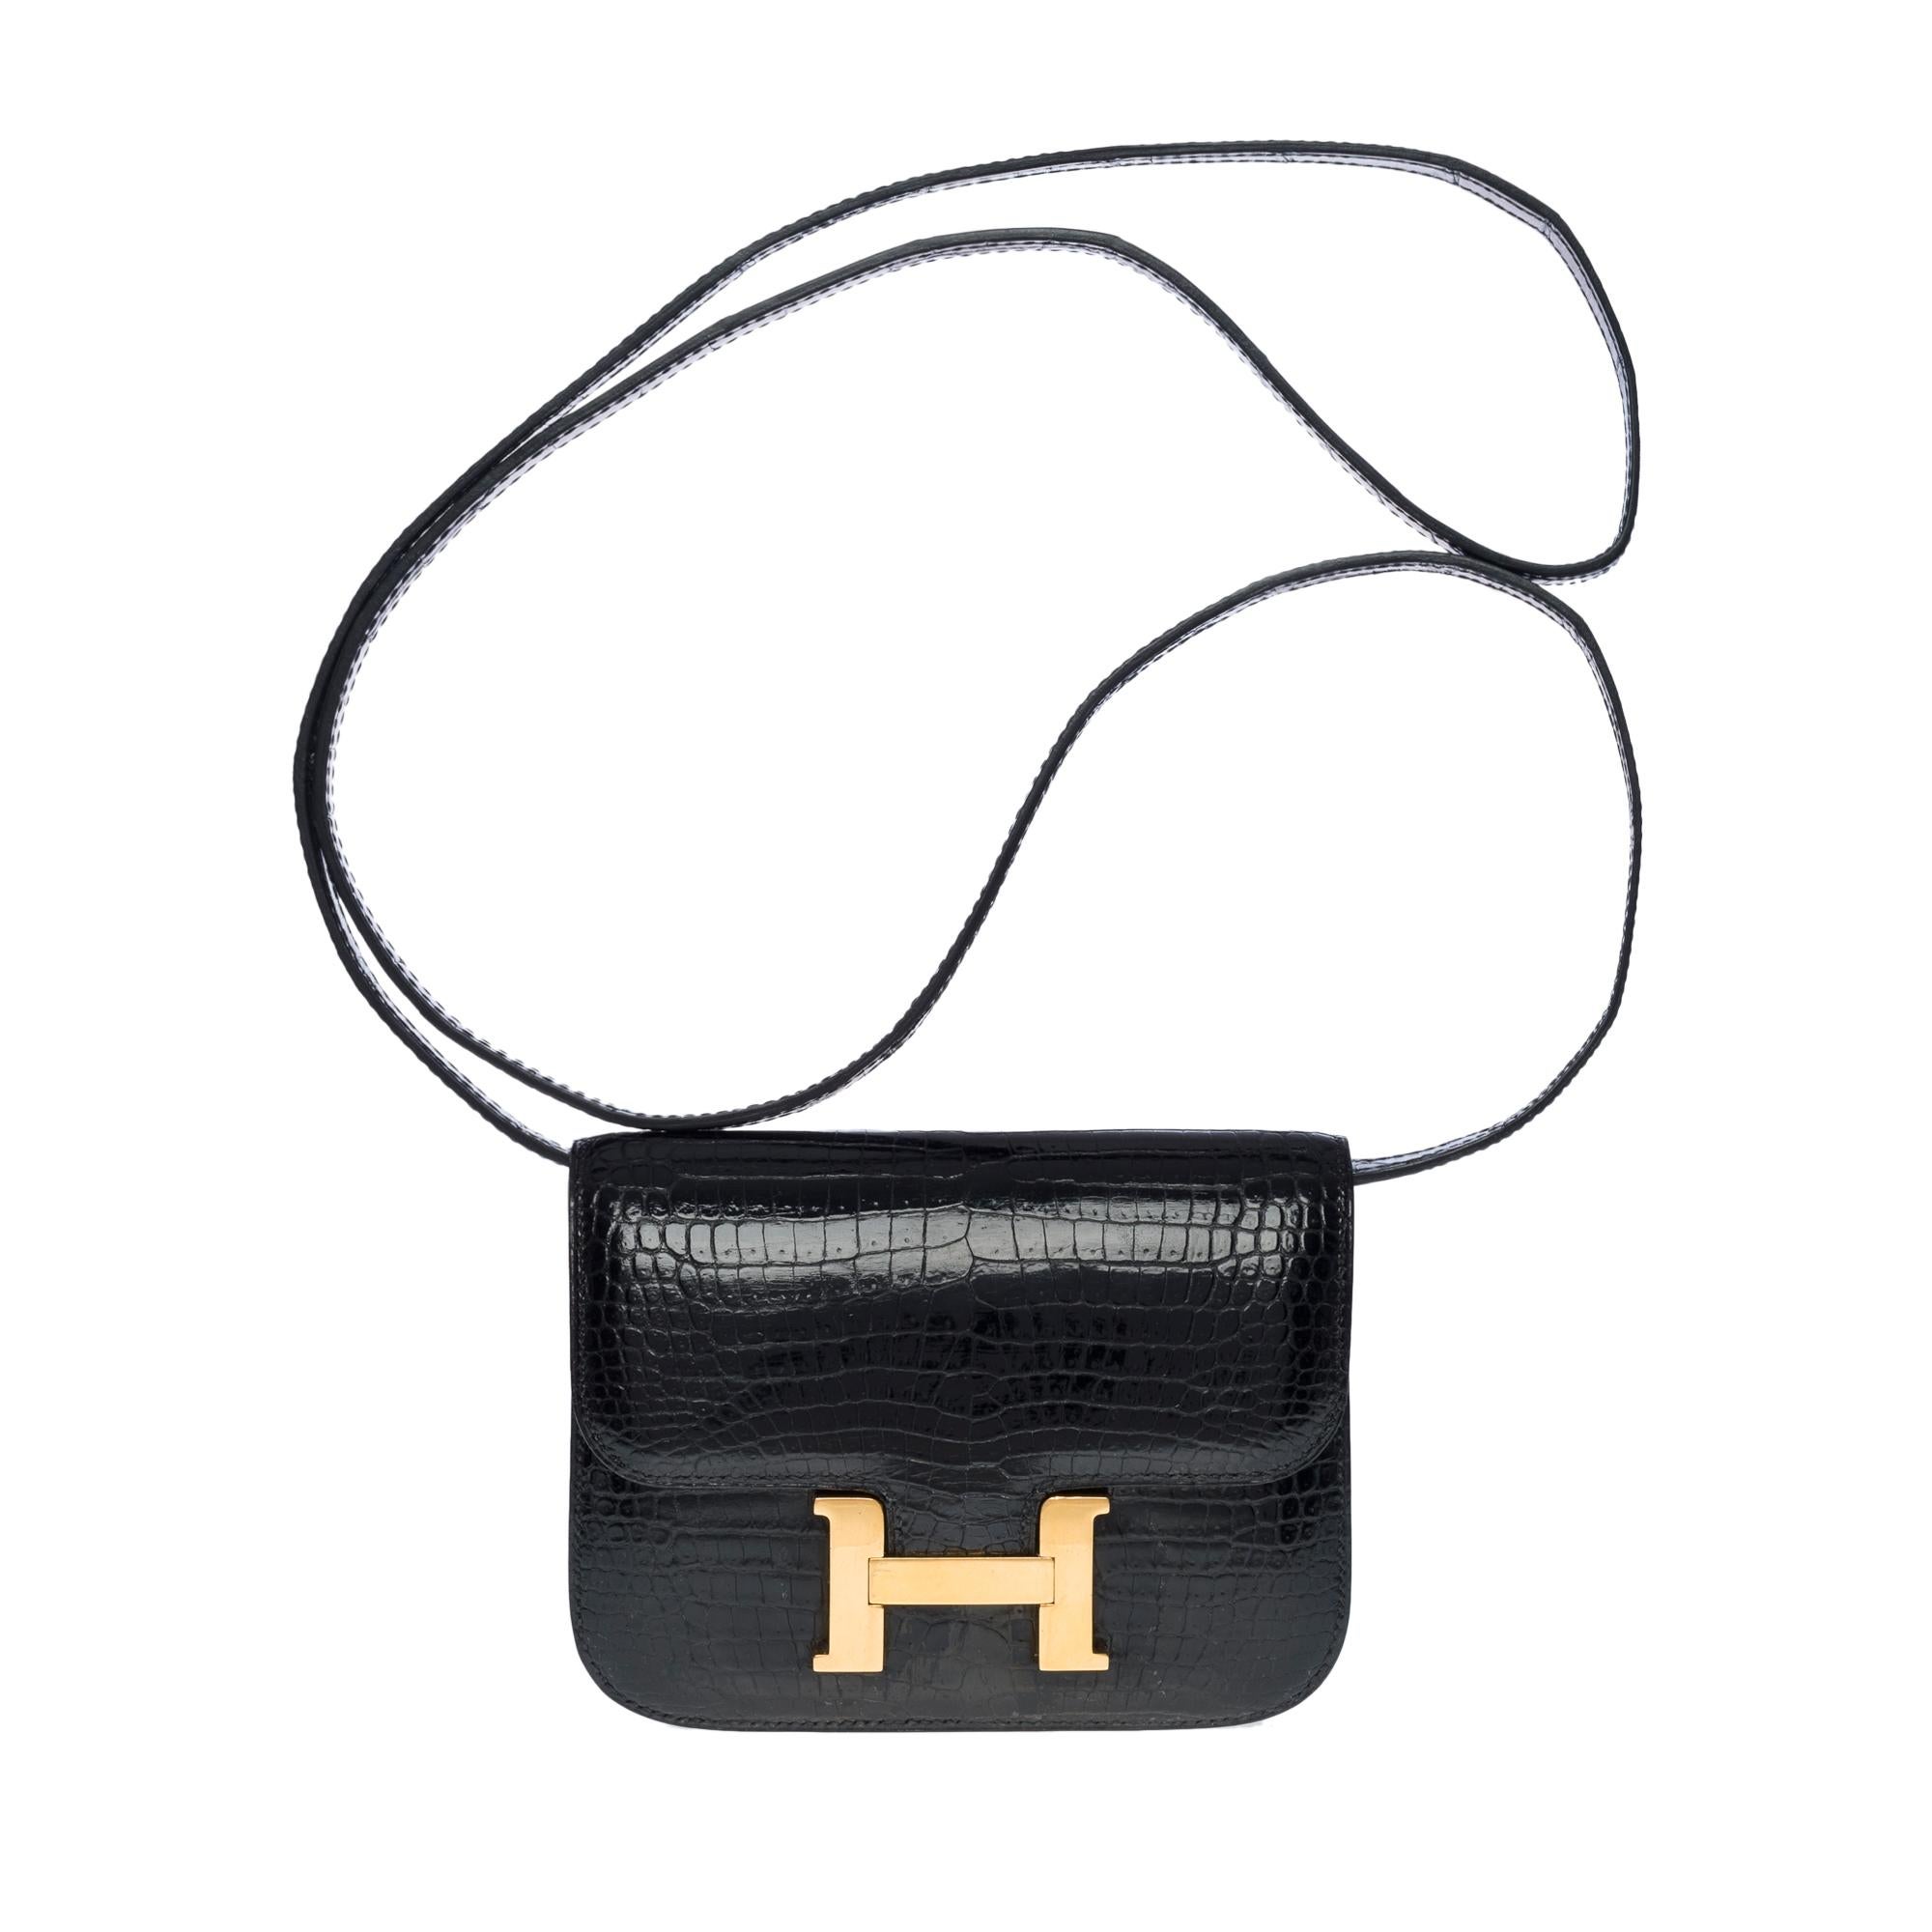 Rare Hermès Clutch Micro Constance in black porosus crocodile, gold plated metal hardware, removable black crocodile shoulder strap compatible added (not from Hermès) for hand, shoulder or crossbody carry

Zipper on flap
Black leather lining, one